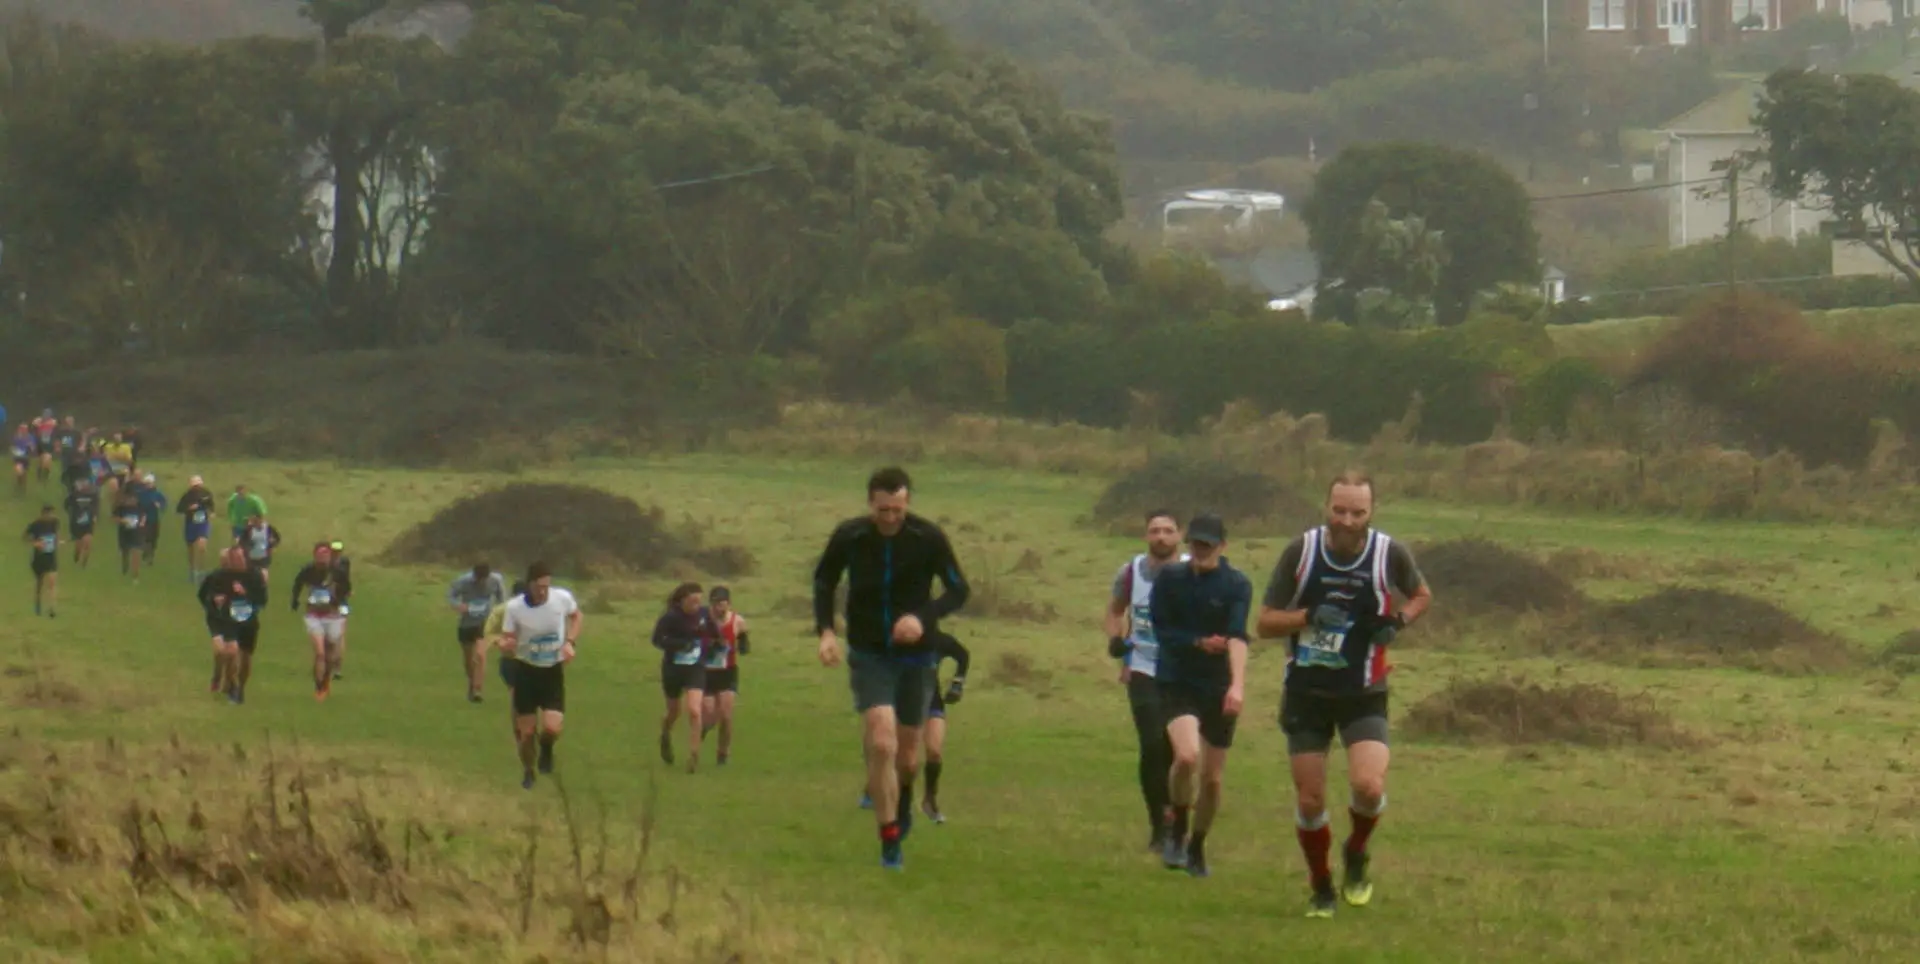 Runners taking on the Chilly Hilly Tennyson Climb in the mist